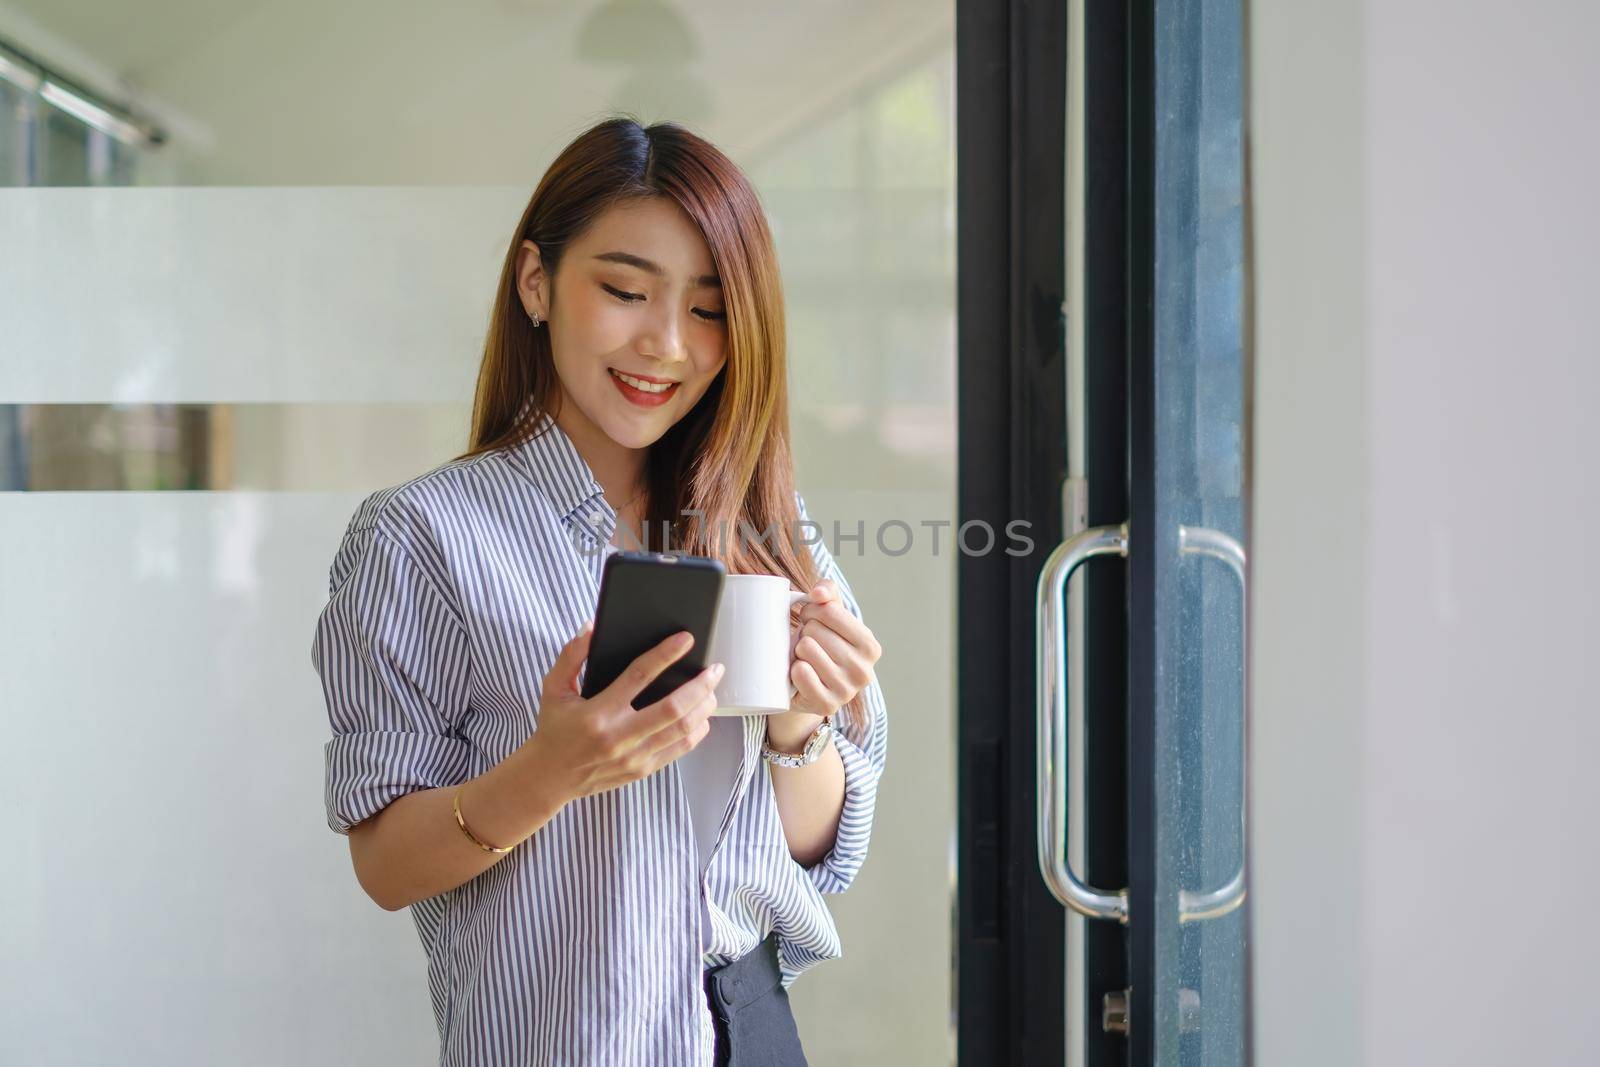 Young beautiful woman holding coffee cup and feeling fresh while sitting at her working place at monday morning